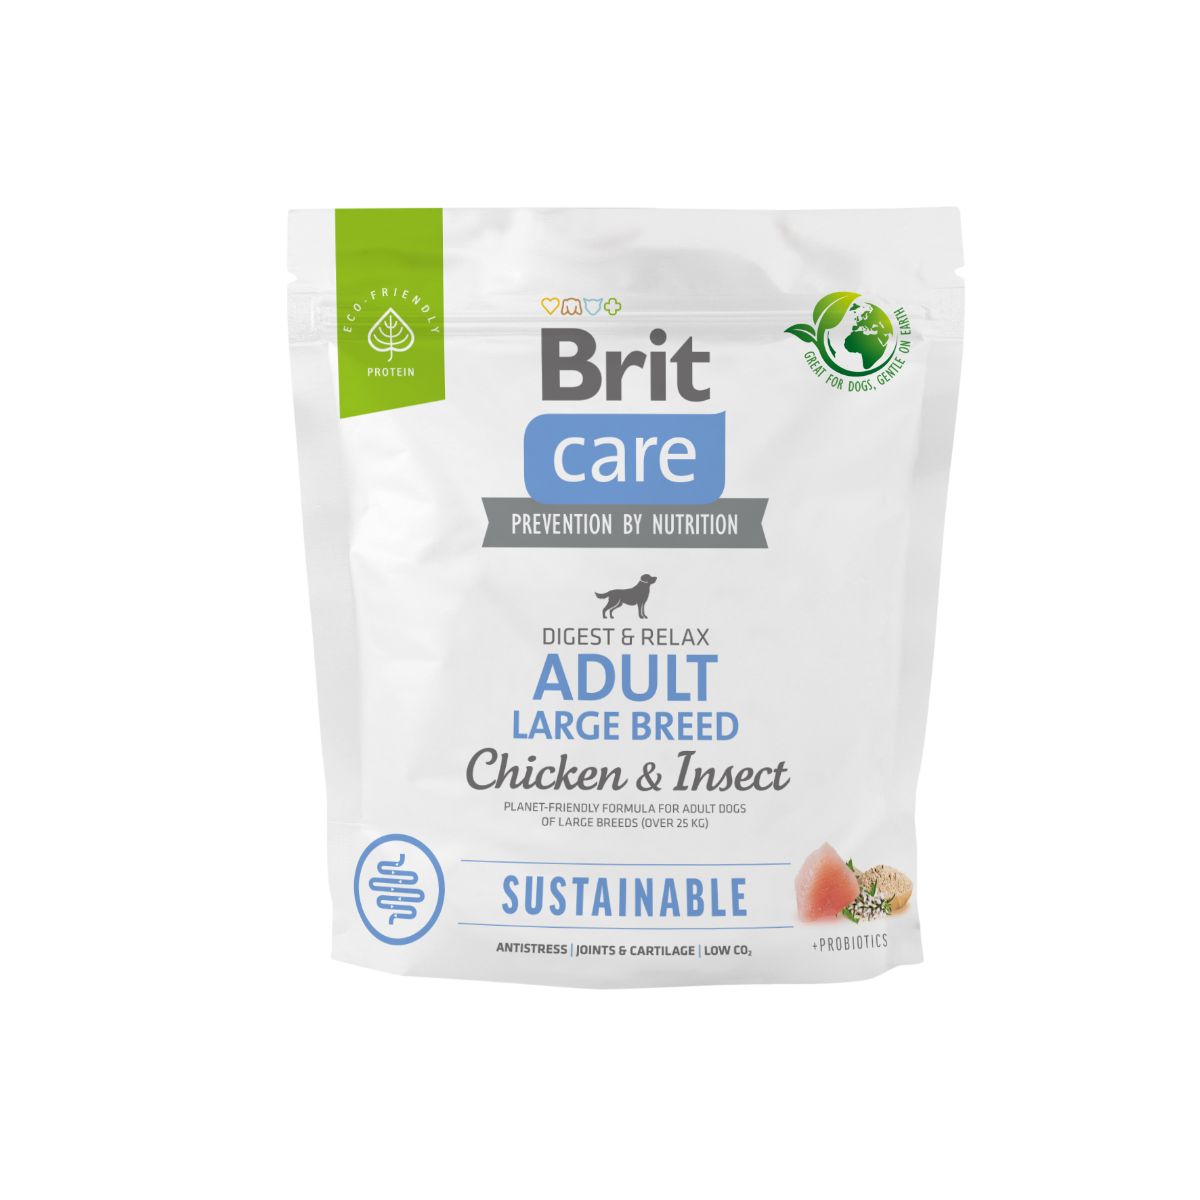 Brit Care – Sustainable – Adult Large Breed-4